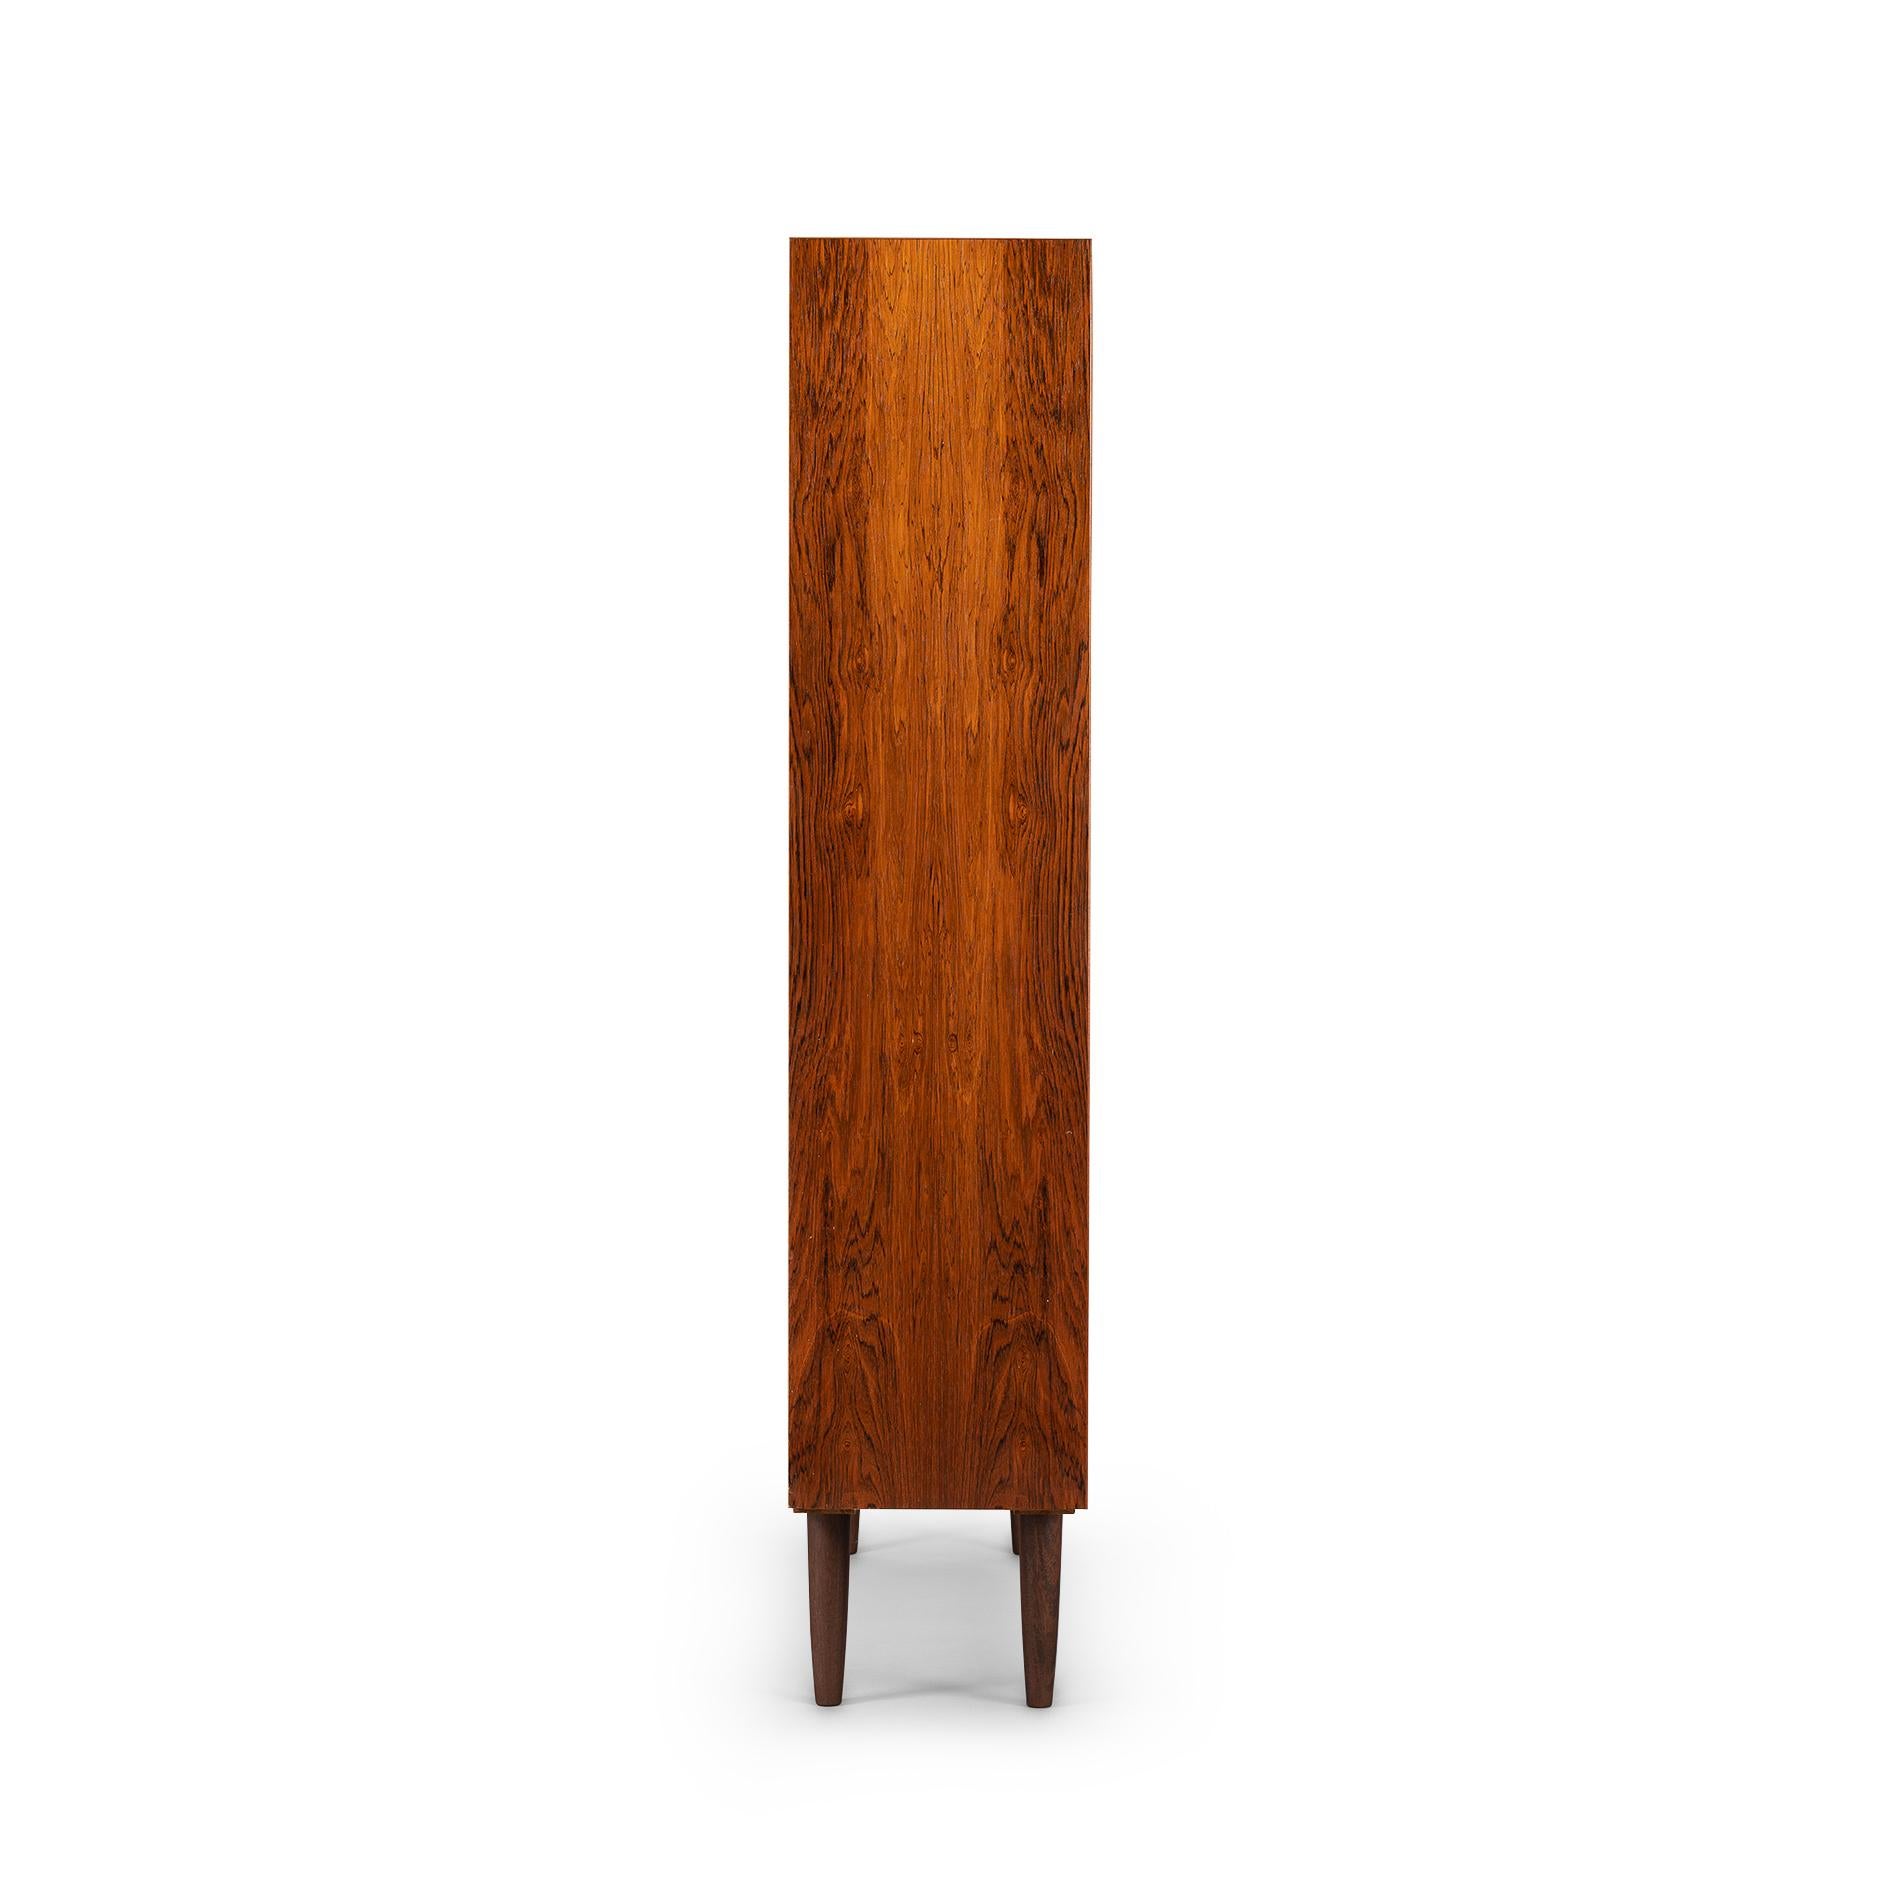 Danish tall bookcase in beautiful hardwood veneer. Designed by Carlo Jensen and made by Hundevad & Co. This bookcase is in very good vintage condition and has a total of 8 height-adjustable shelves.
  